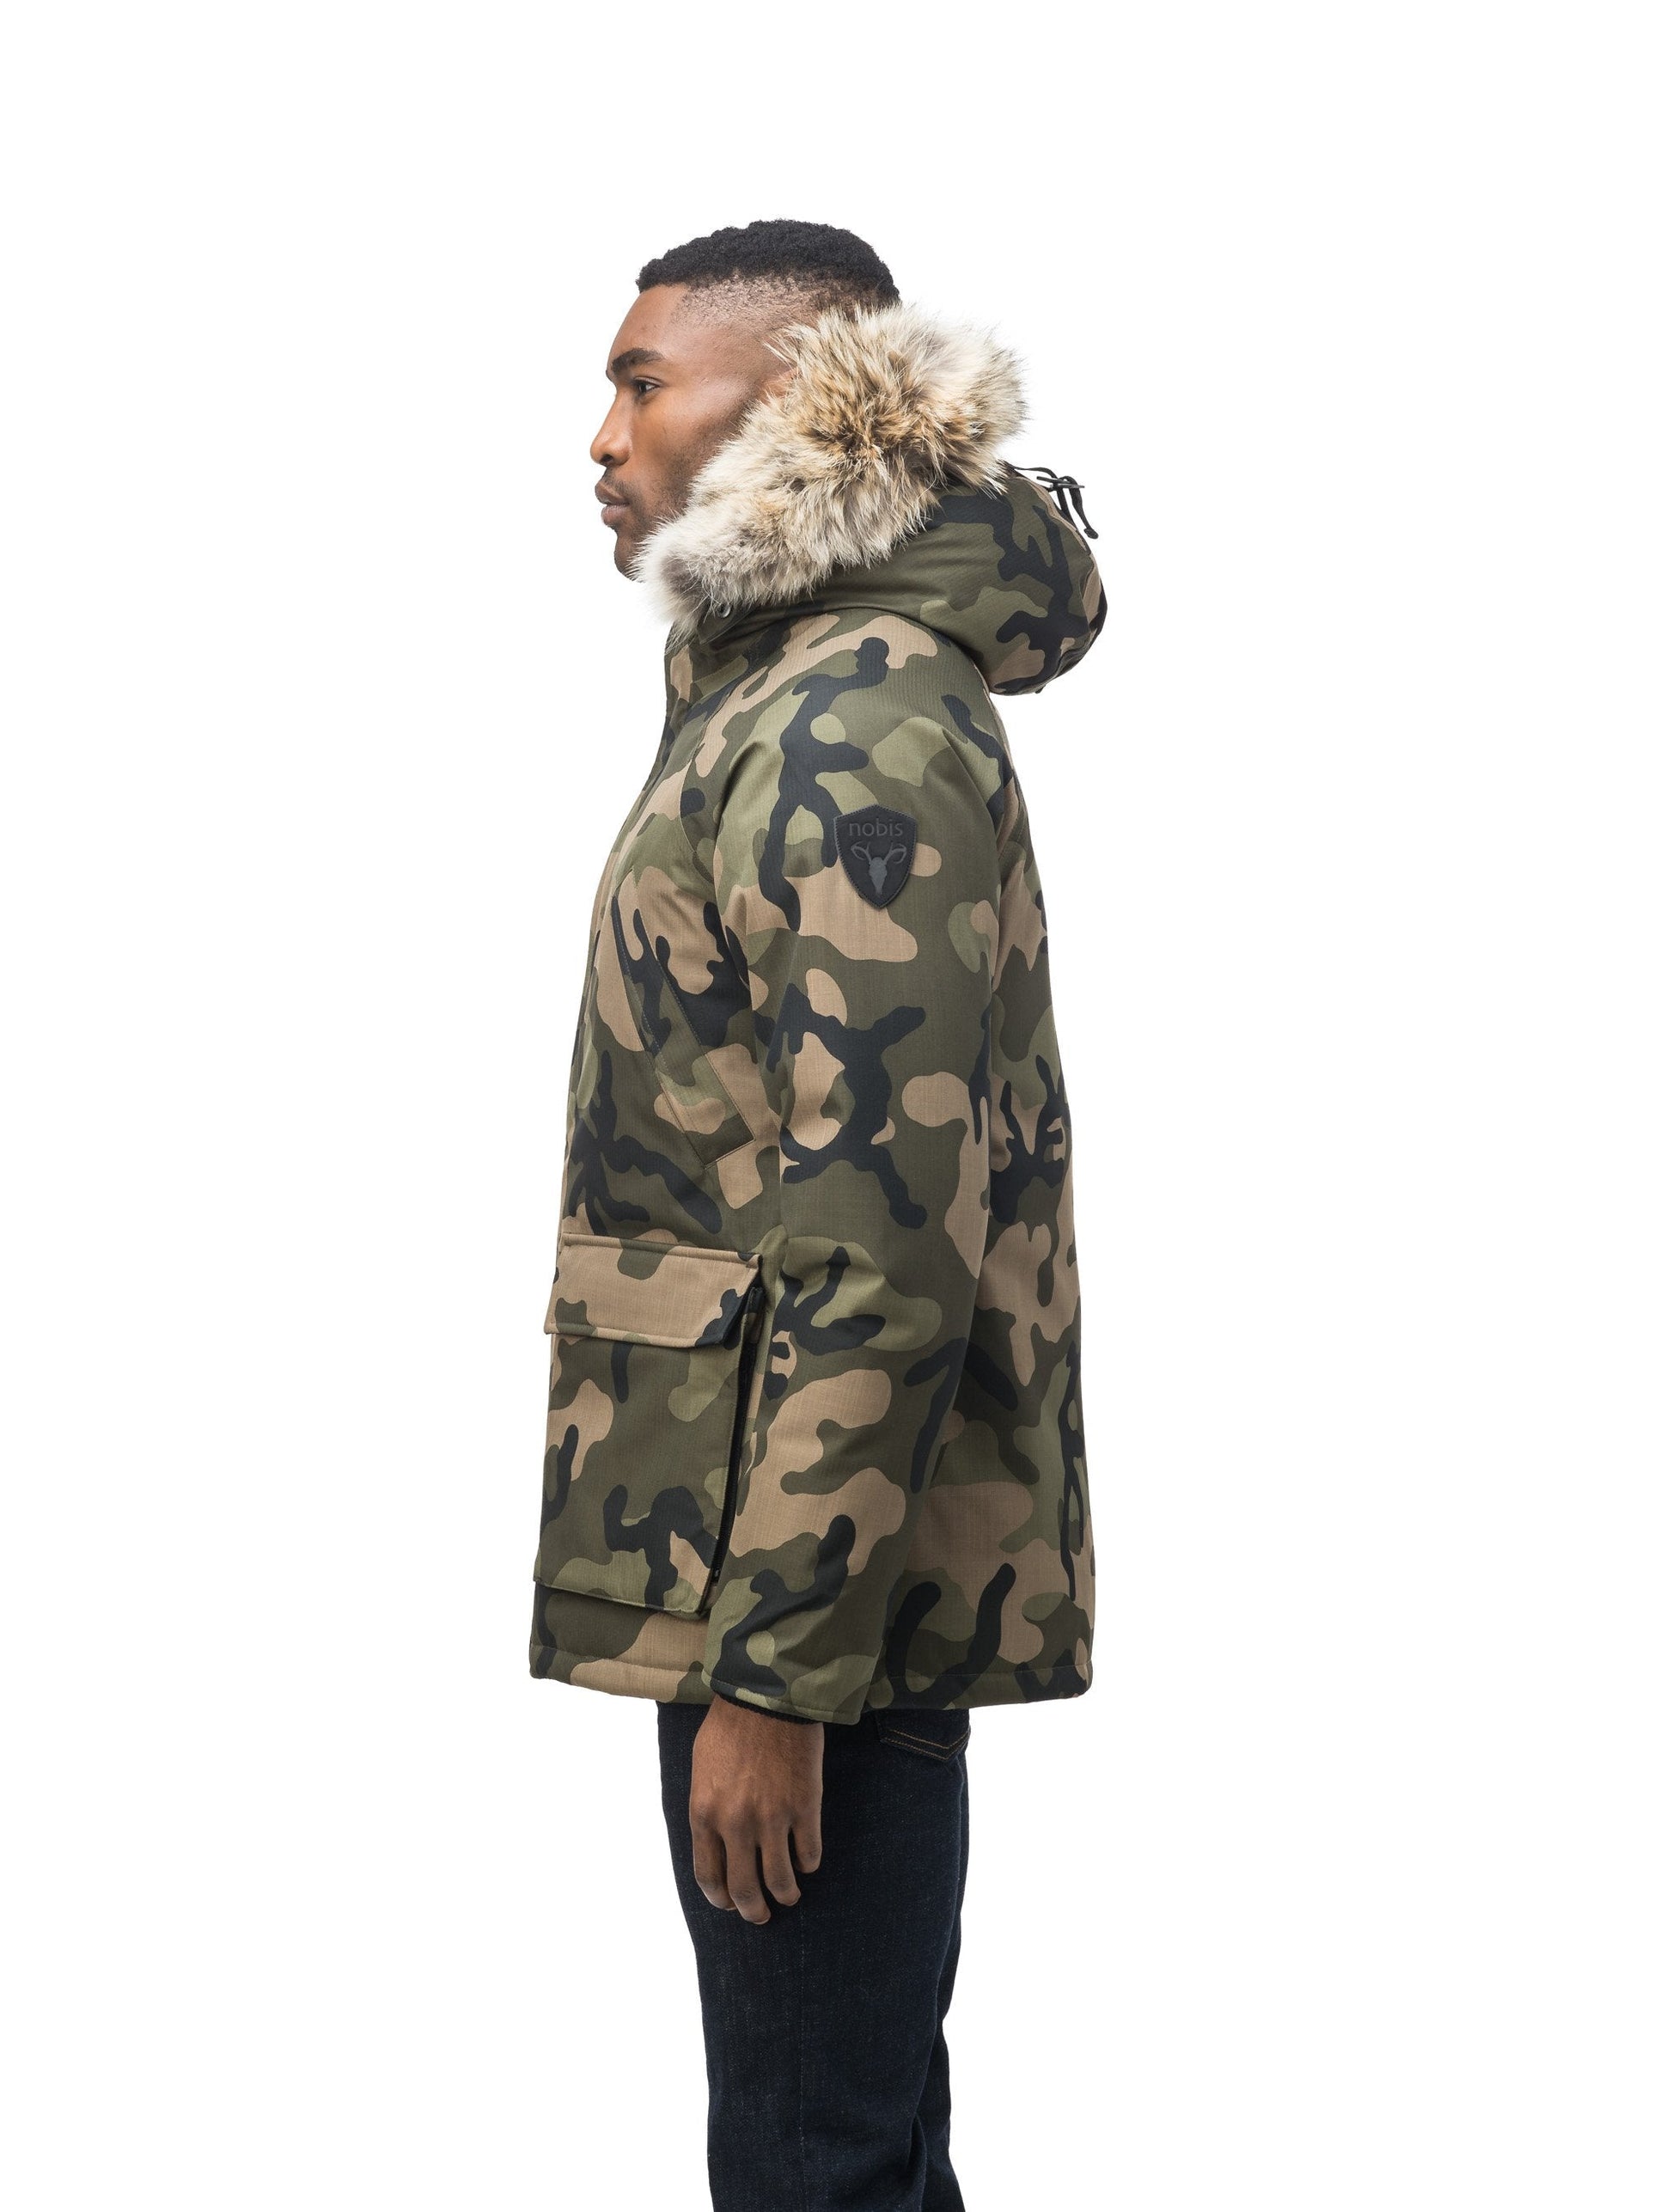 Men's waist length down filled jacket with two front pockets with magnetic closure and a removable fur trim on the hood in CH Camo